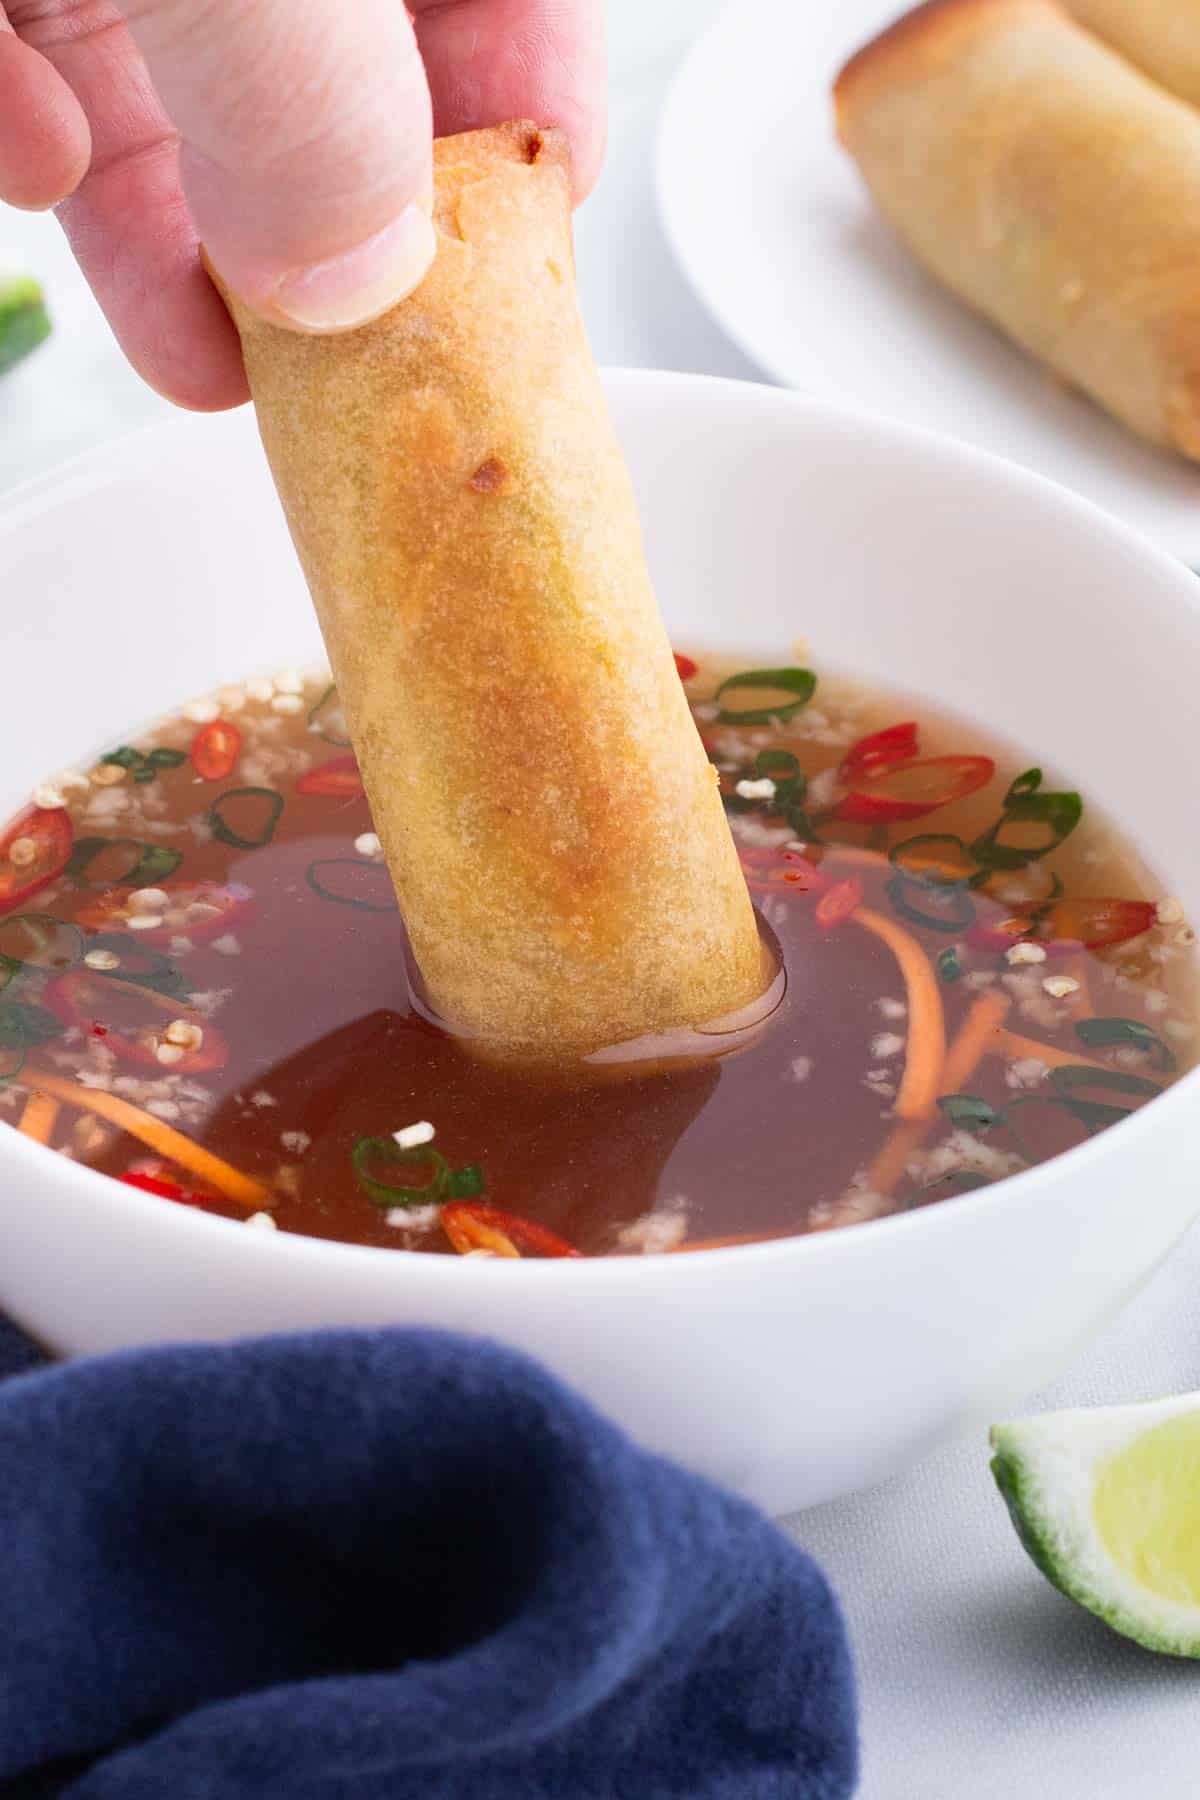 A spring roll is dipped into a bowl of fish sauce dipping sauce.